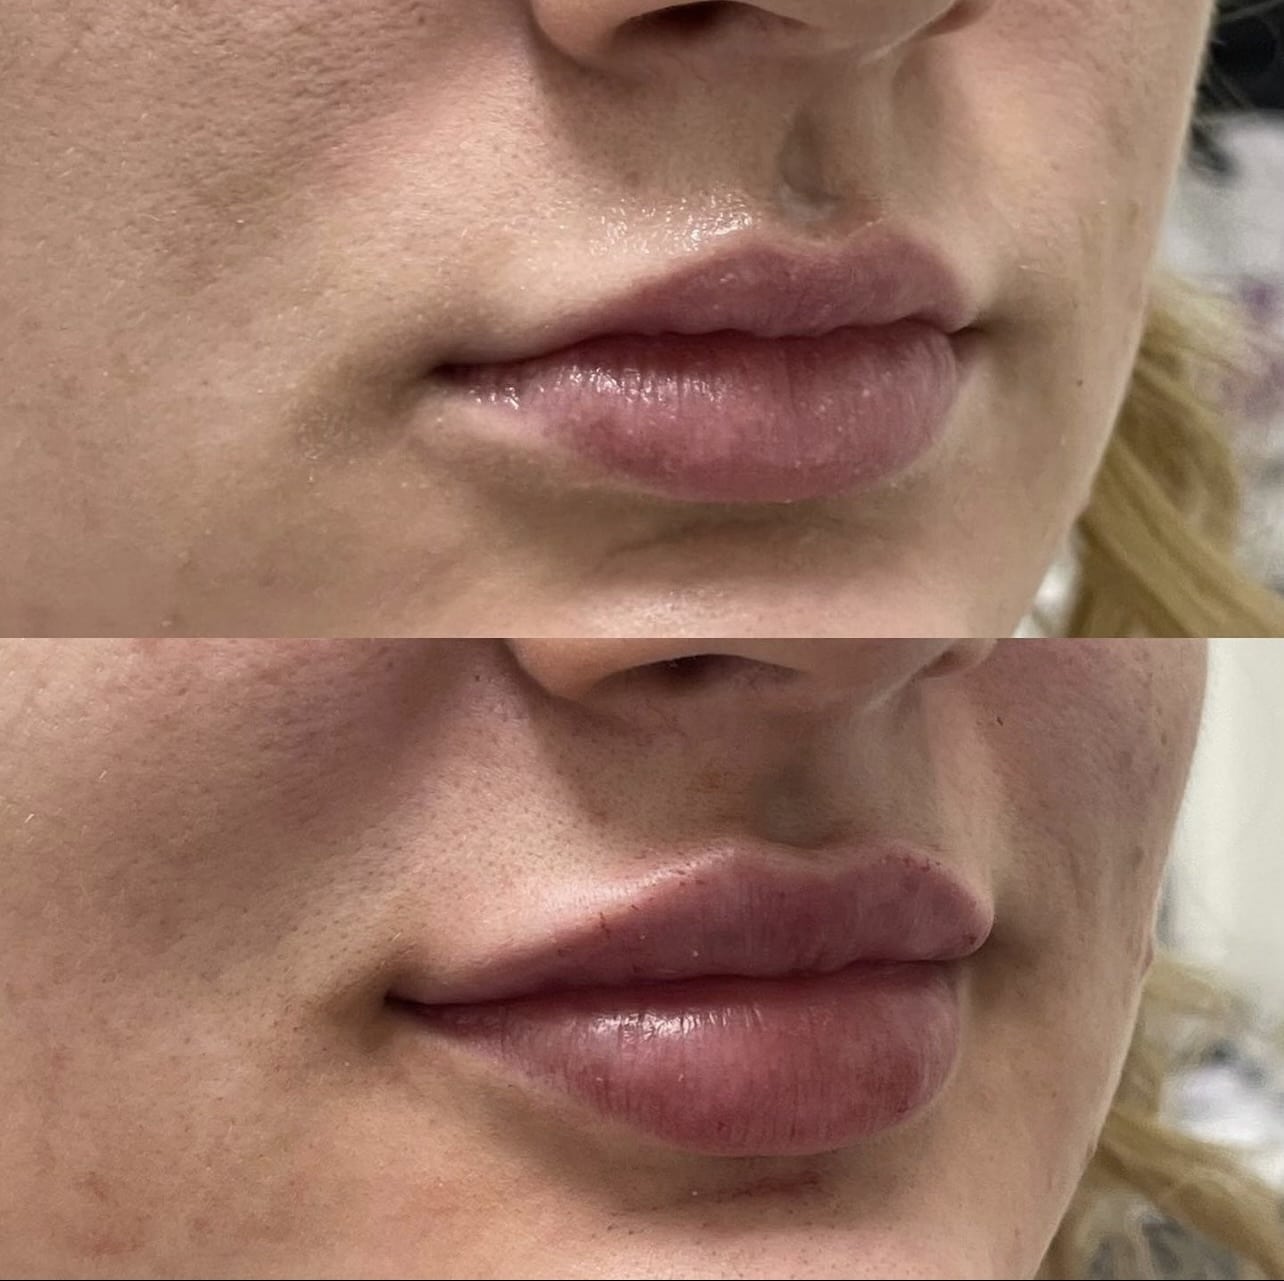 Photo before and after Lip Enhancement Complex Treatment for Lips | Sculpted Aesthetics in Columbia, SC